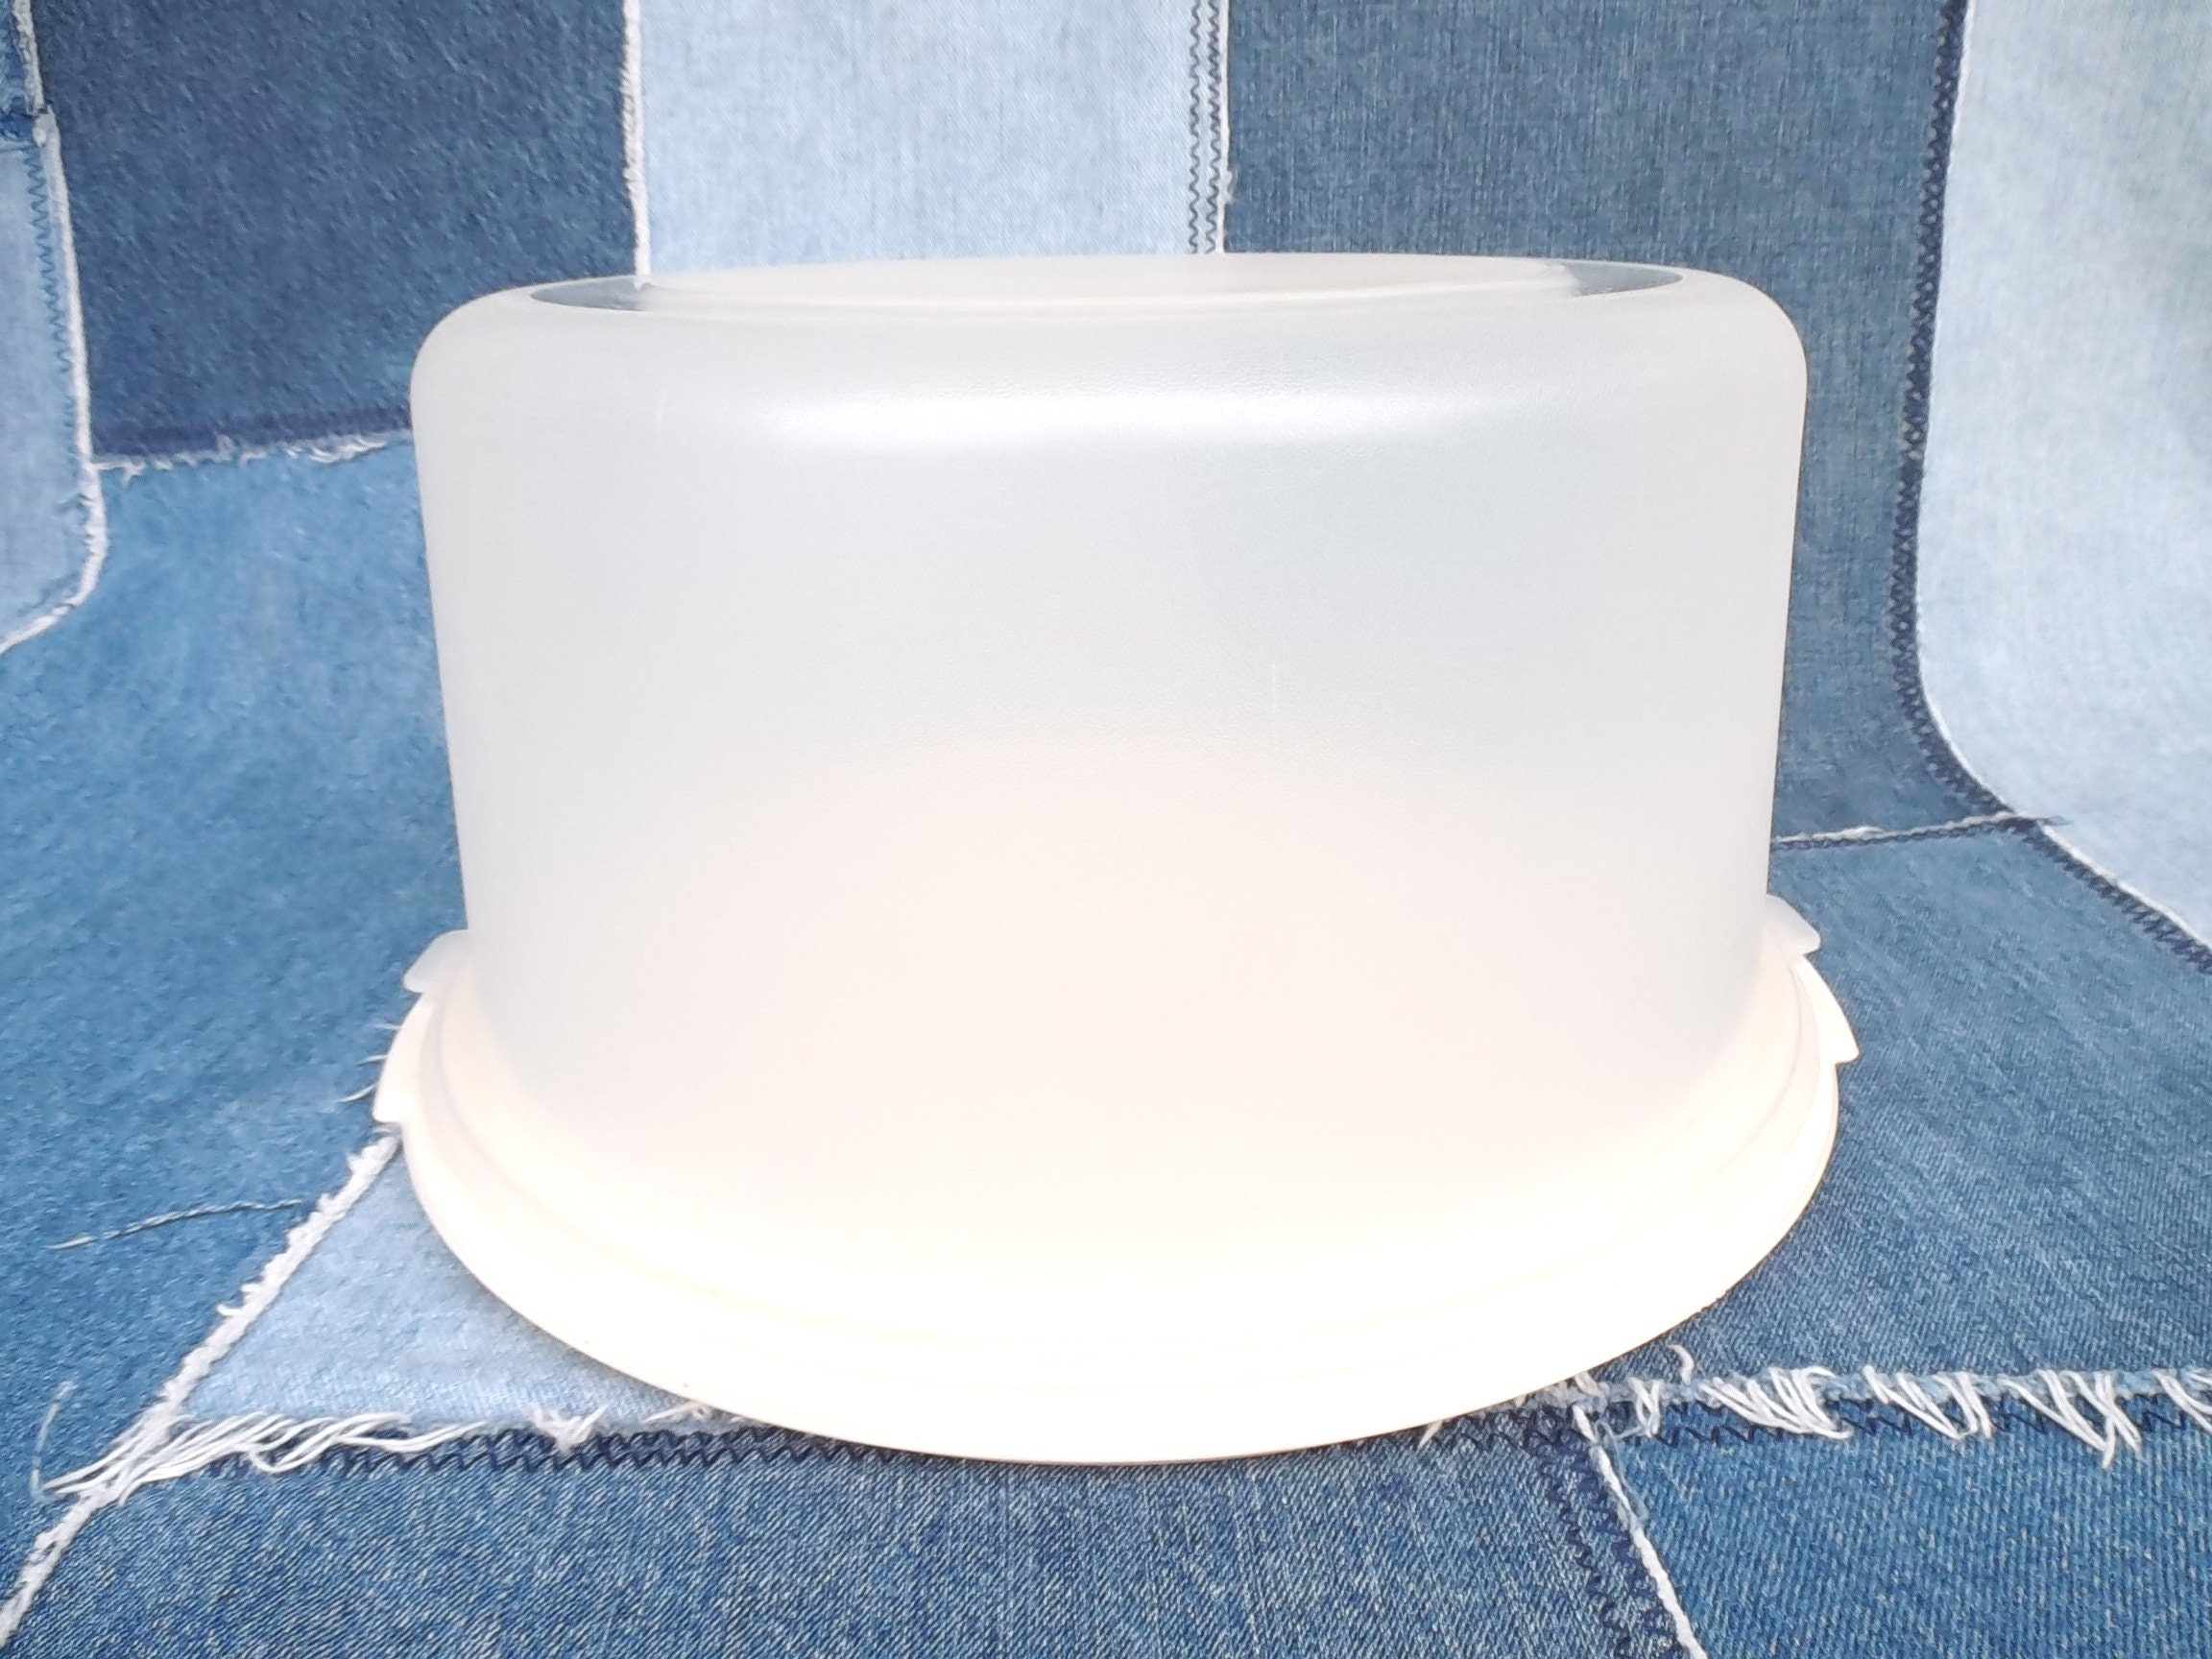 Vintage Rubbermaid Servin' Saver Cake Holder, Almond Base, Number 0035  Rubbermaid 12 Inch Cake Keeper, Pastry Storage, 1980s Rubbermaid 